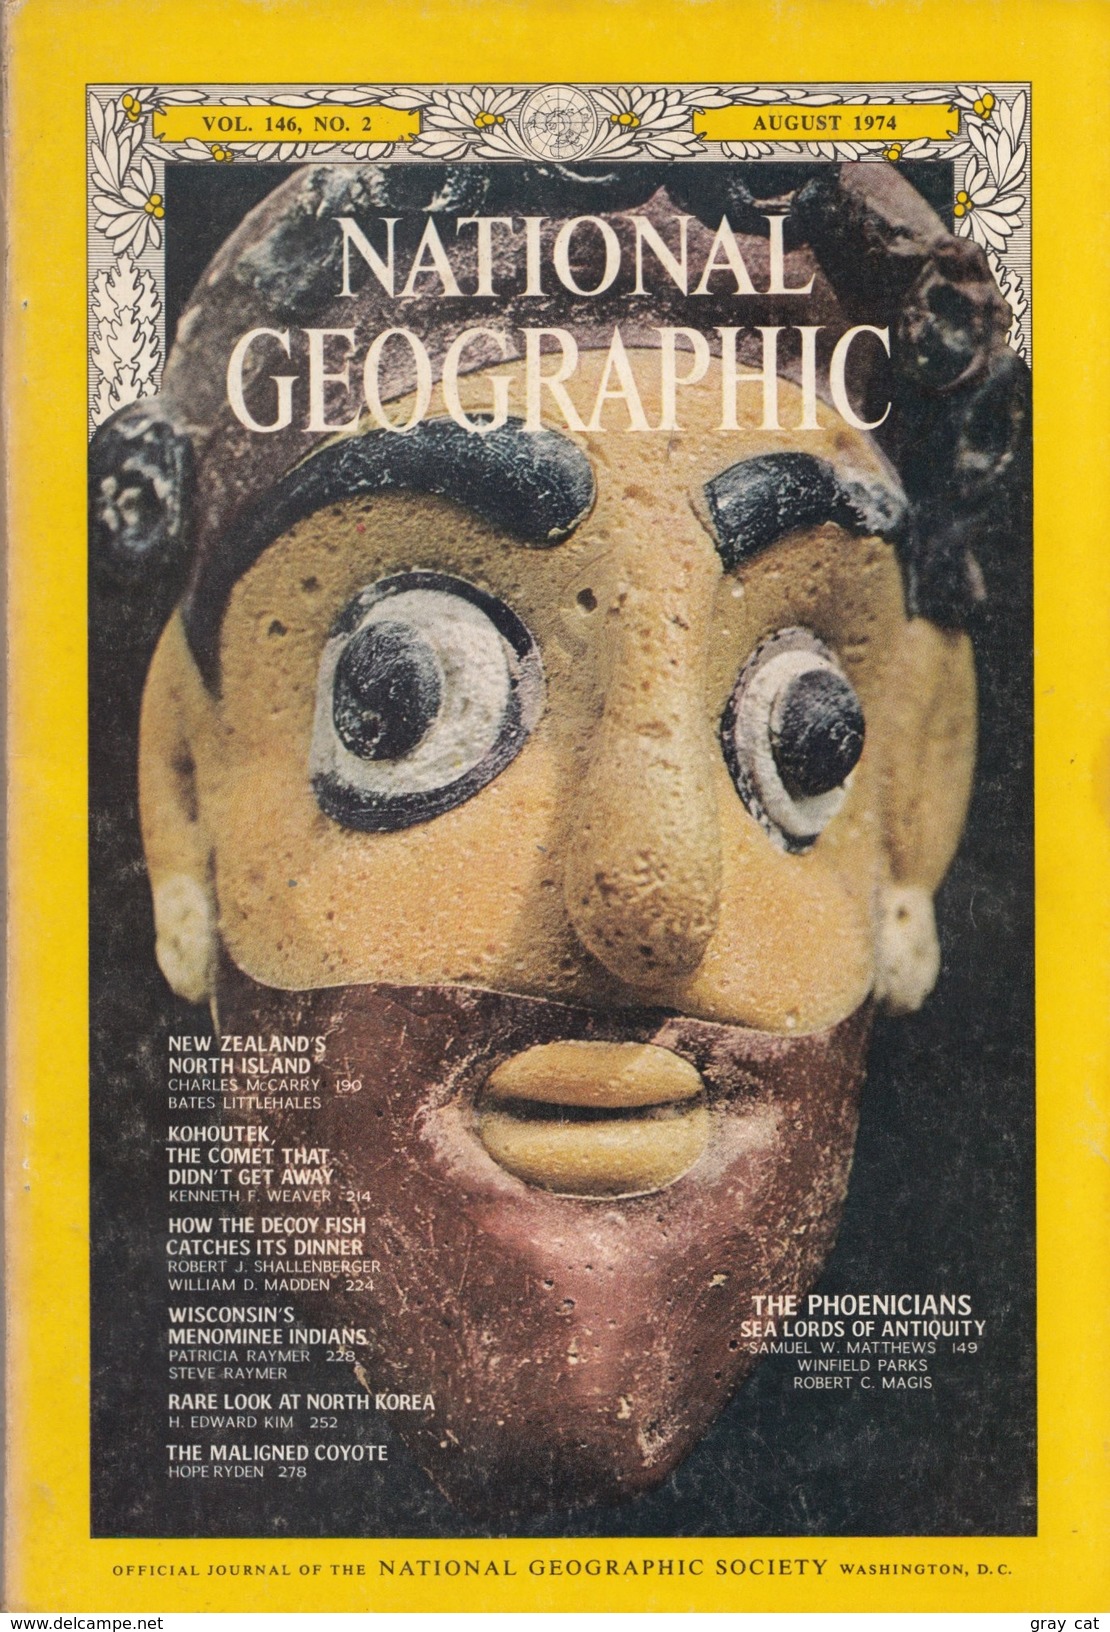 National Geographic Vol. 146, No. 2, August 1974 - Travel/ Exploration